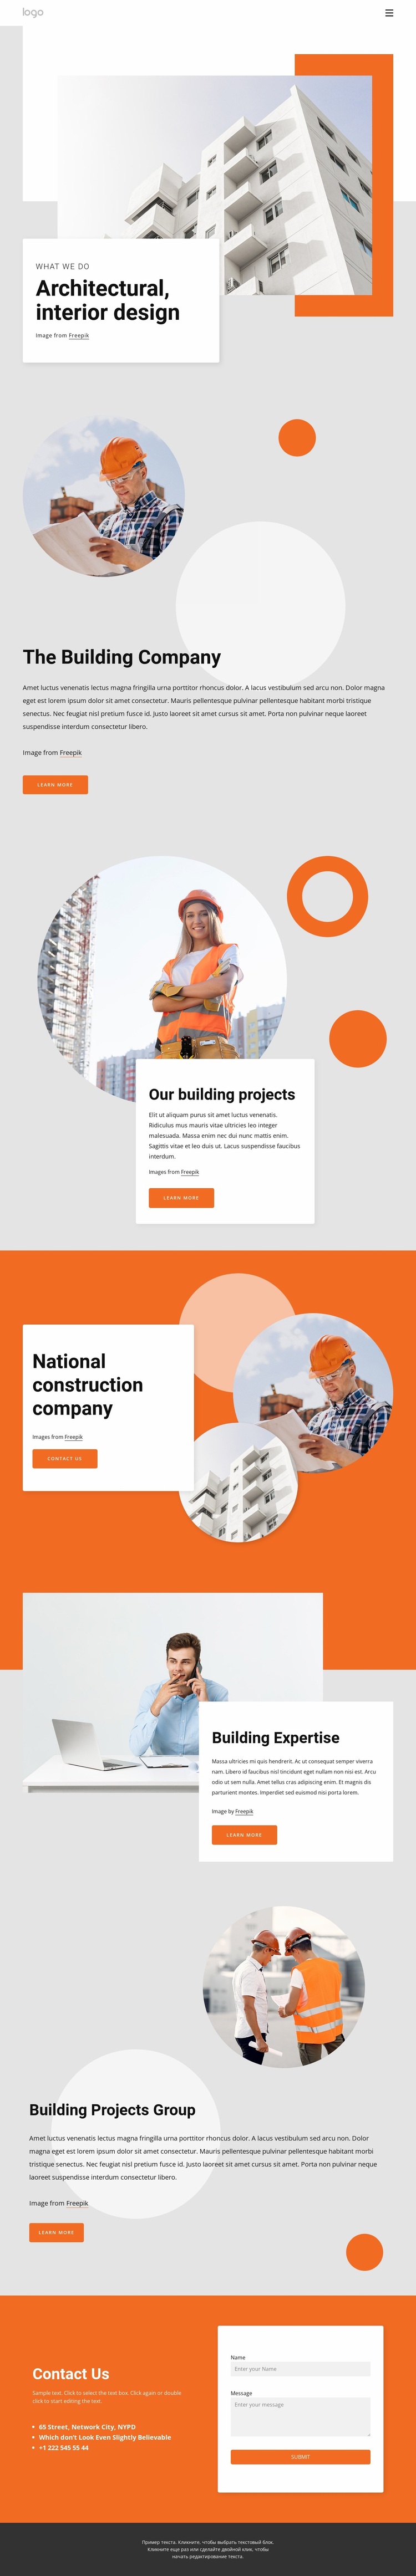 Architects in London Website Design